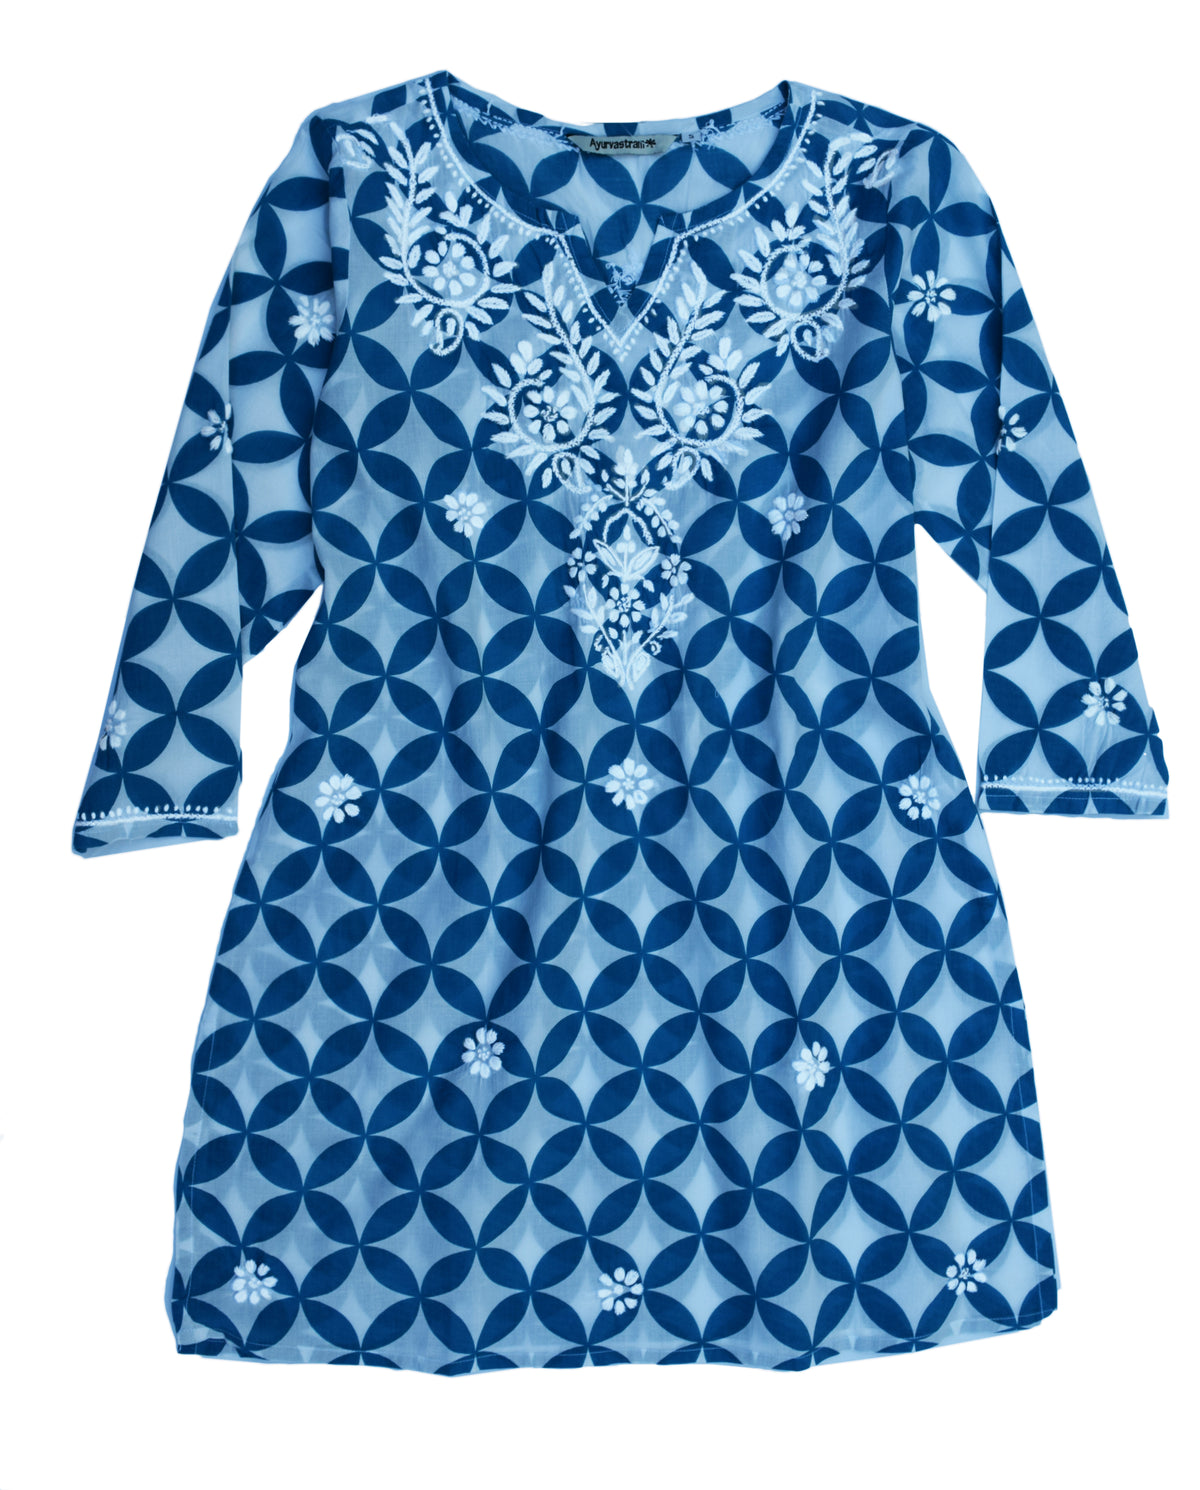 Mili Pure Cotton Printed and Hand Embroidered Tunic Top